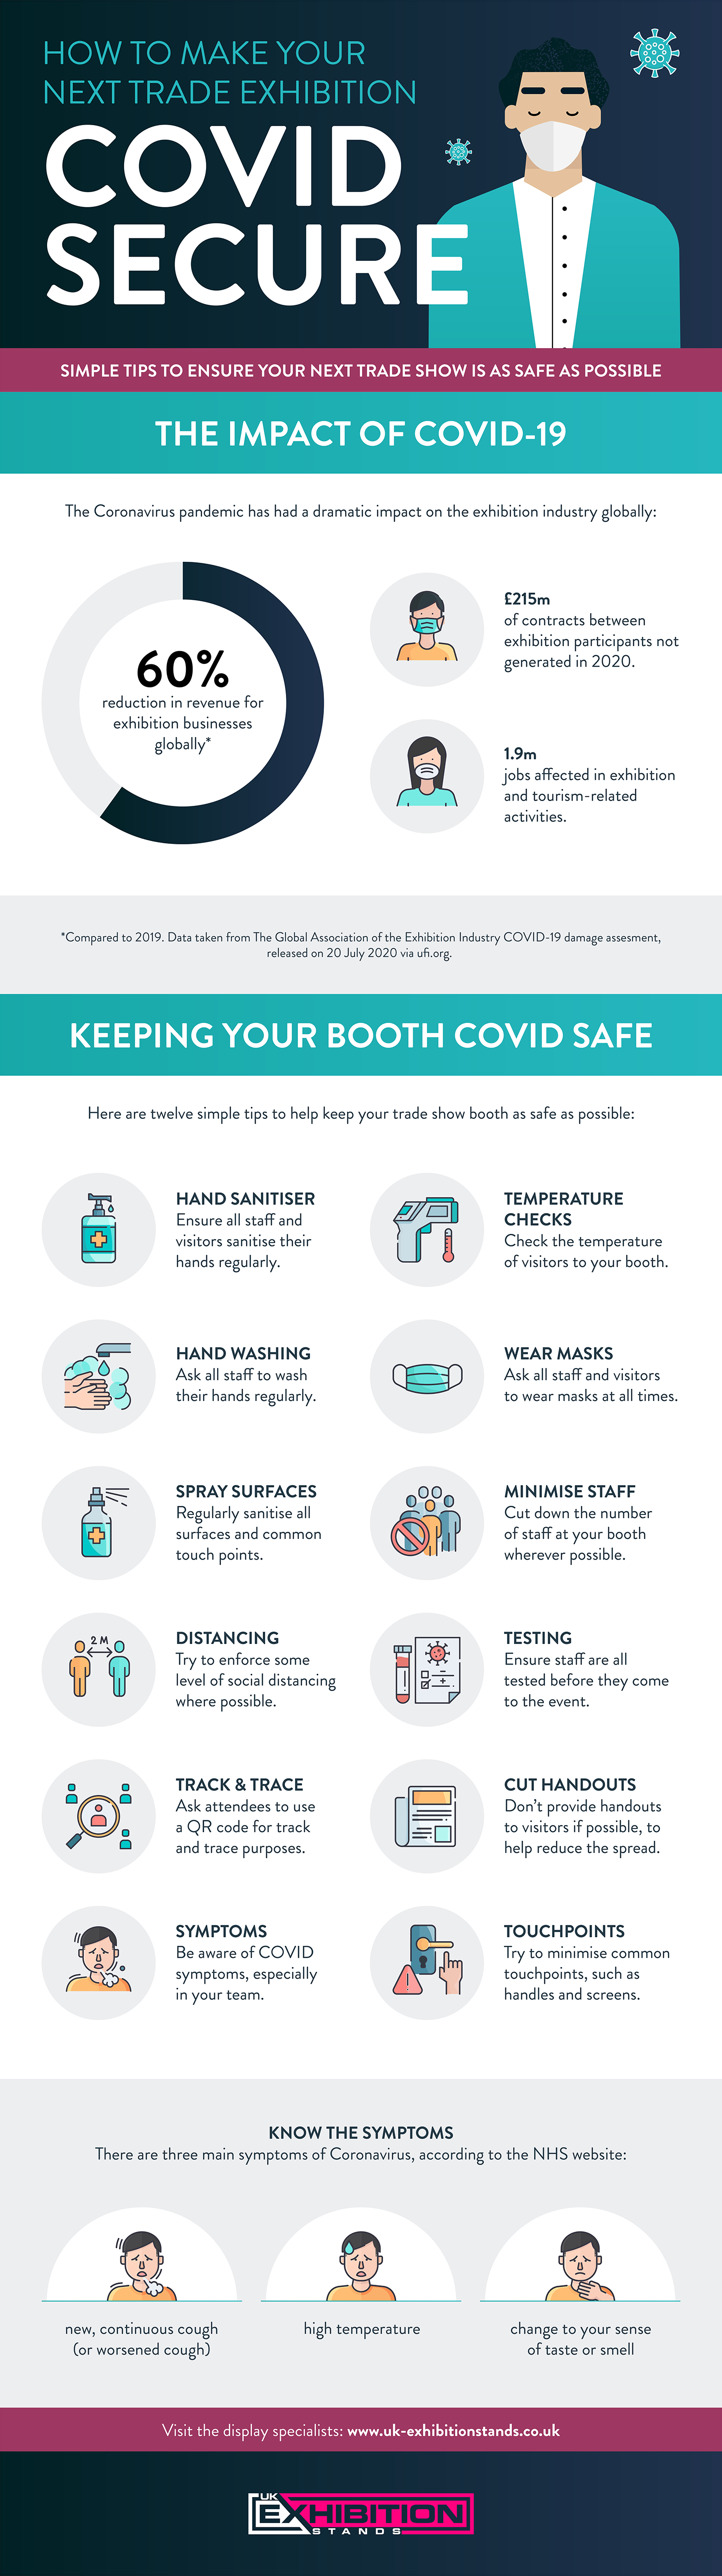 How To Make Your Next Trade Exhibition Covid Secure - Infographic